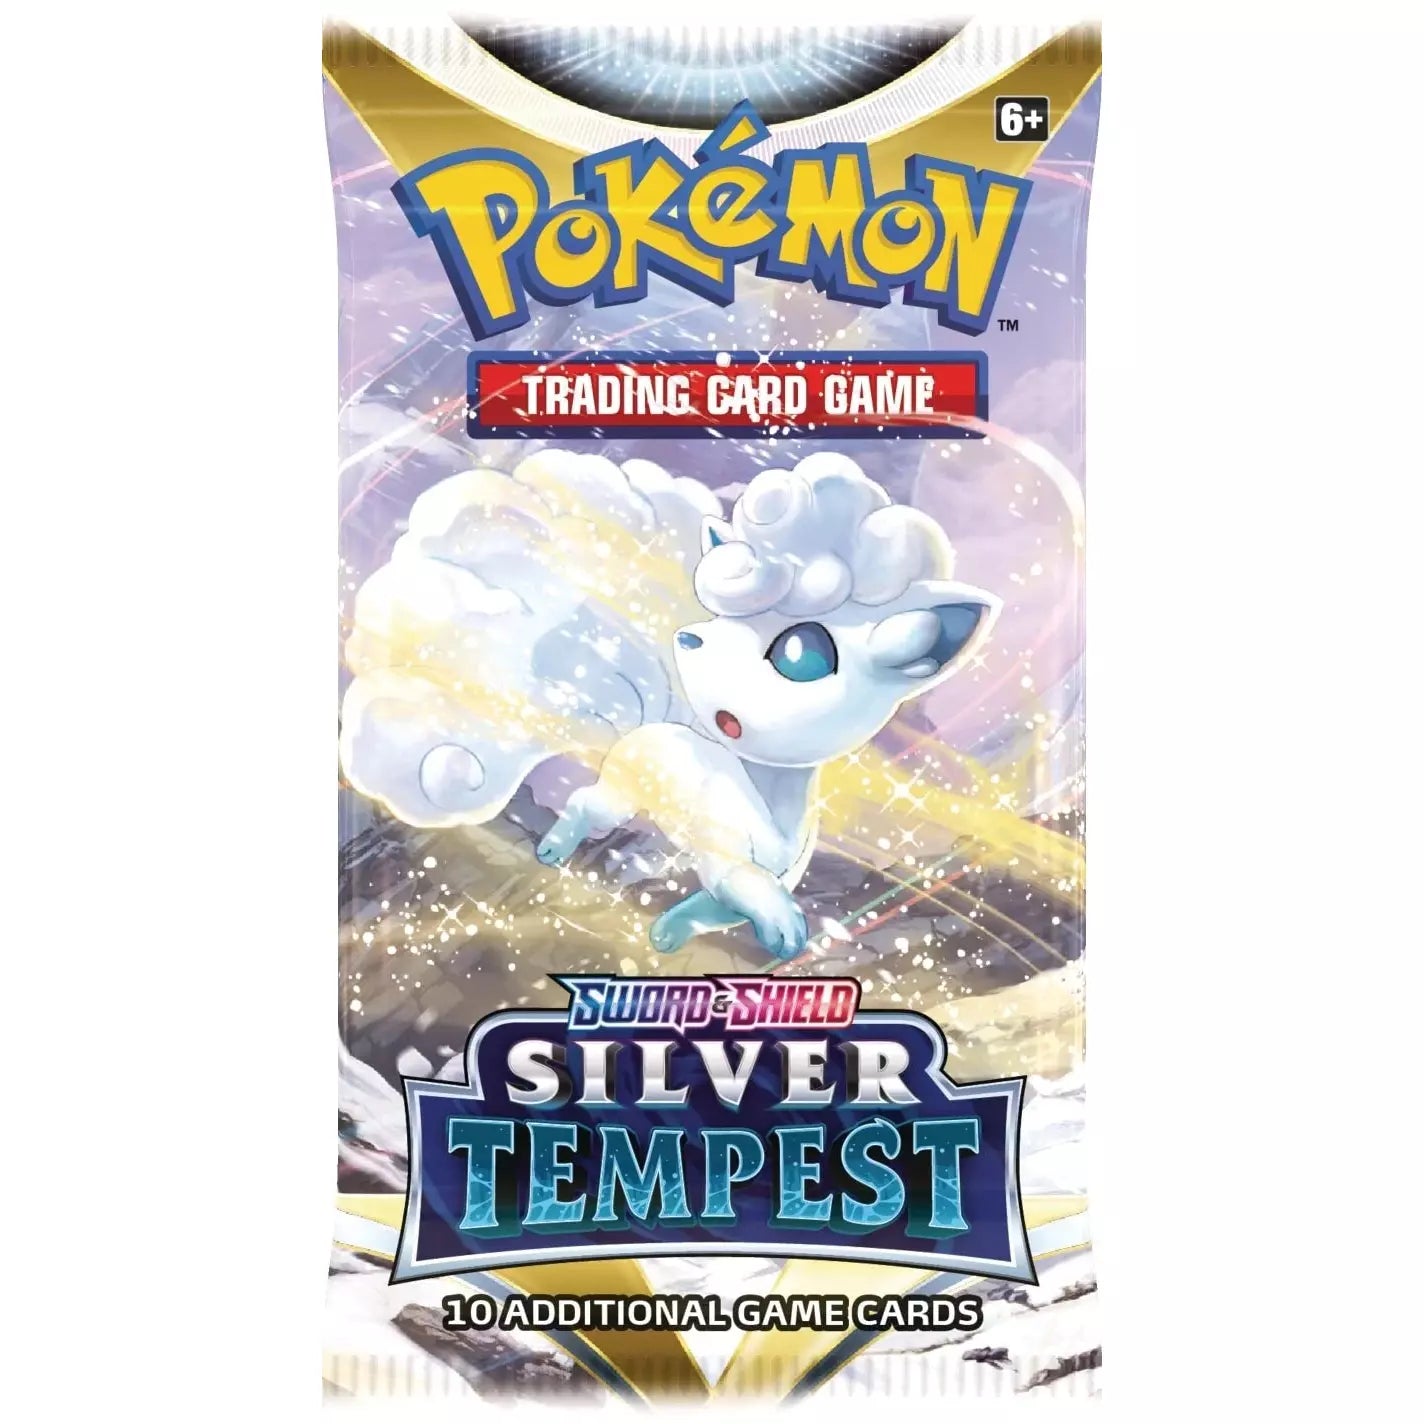 Pokemon Trading Cards Set of 10 Cards - Sword & Shield Silver Tempest - BumbleToys - 14 Years & Up, 8-13 Years, Boys, Card & Board Games, Pokémon, Pre-Order, Puzzle & Board & Card Games